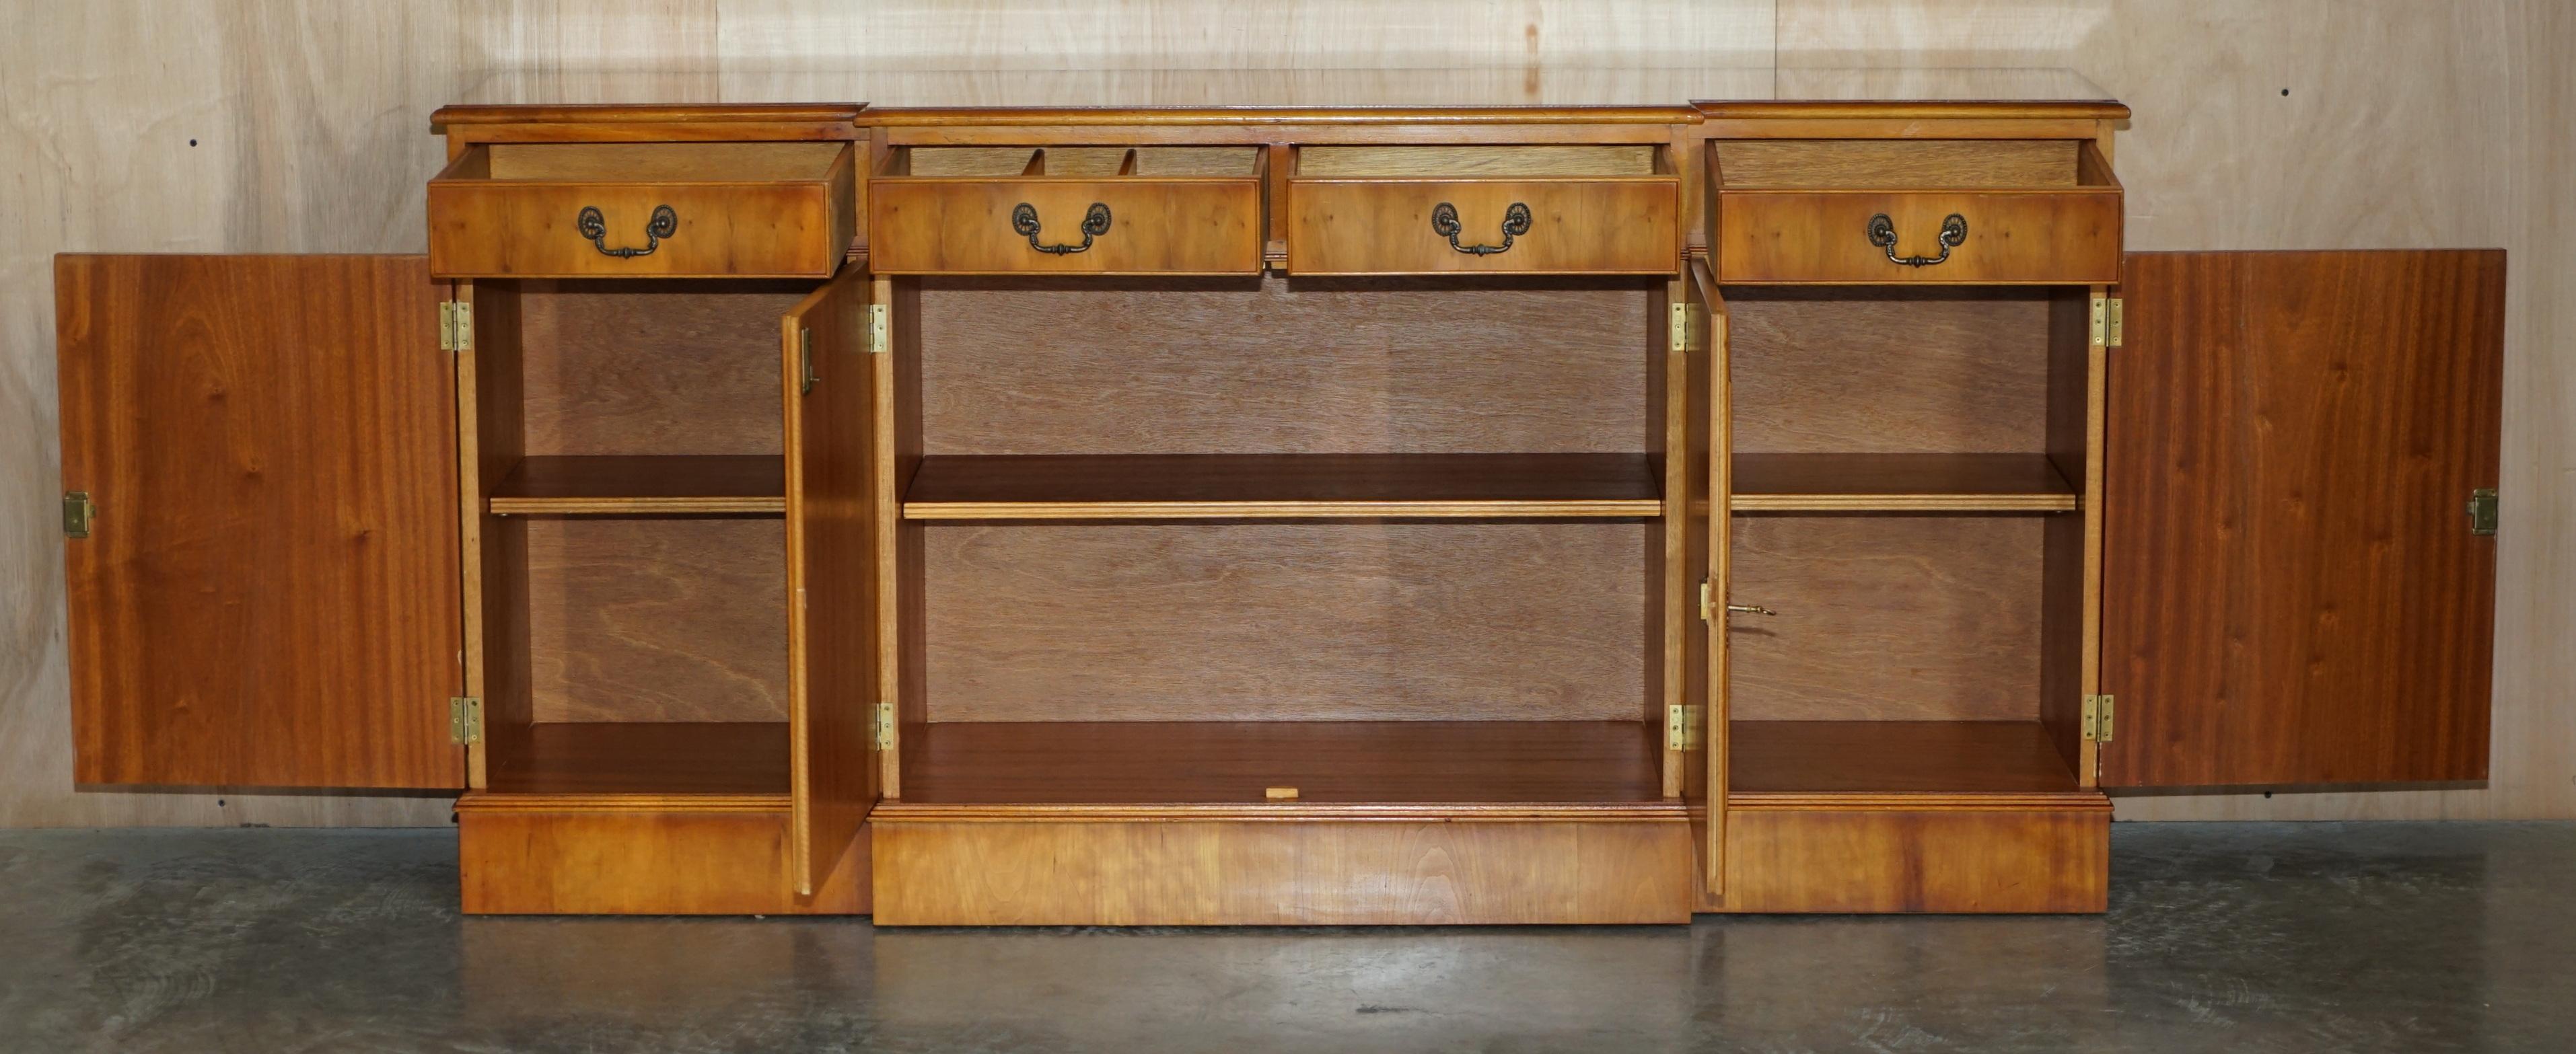 Vintage Burr Yew Wood Breakfront Sideboard with Four Drawers & Original Key For Sale 9